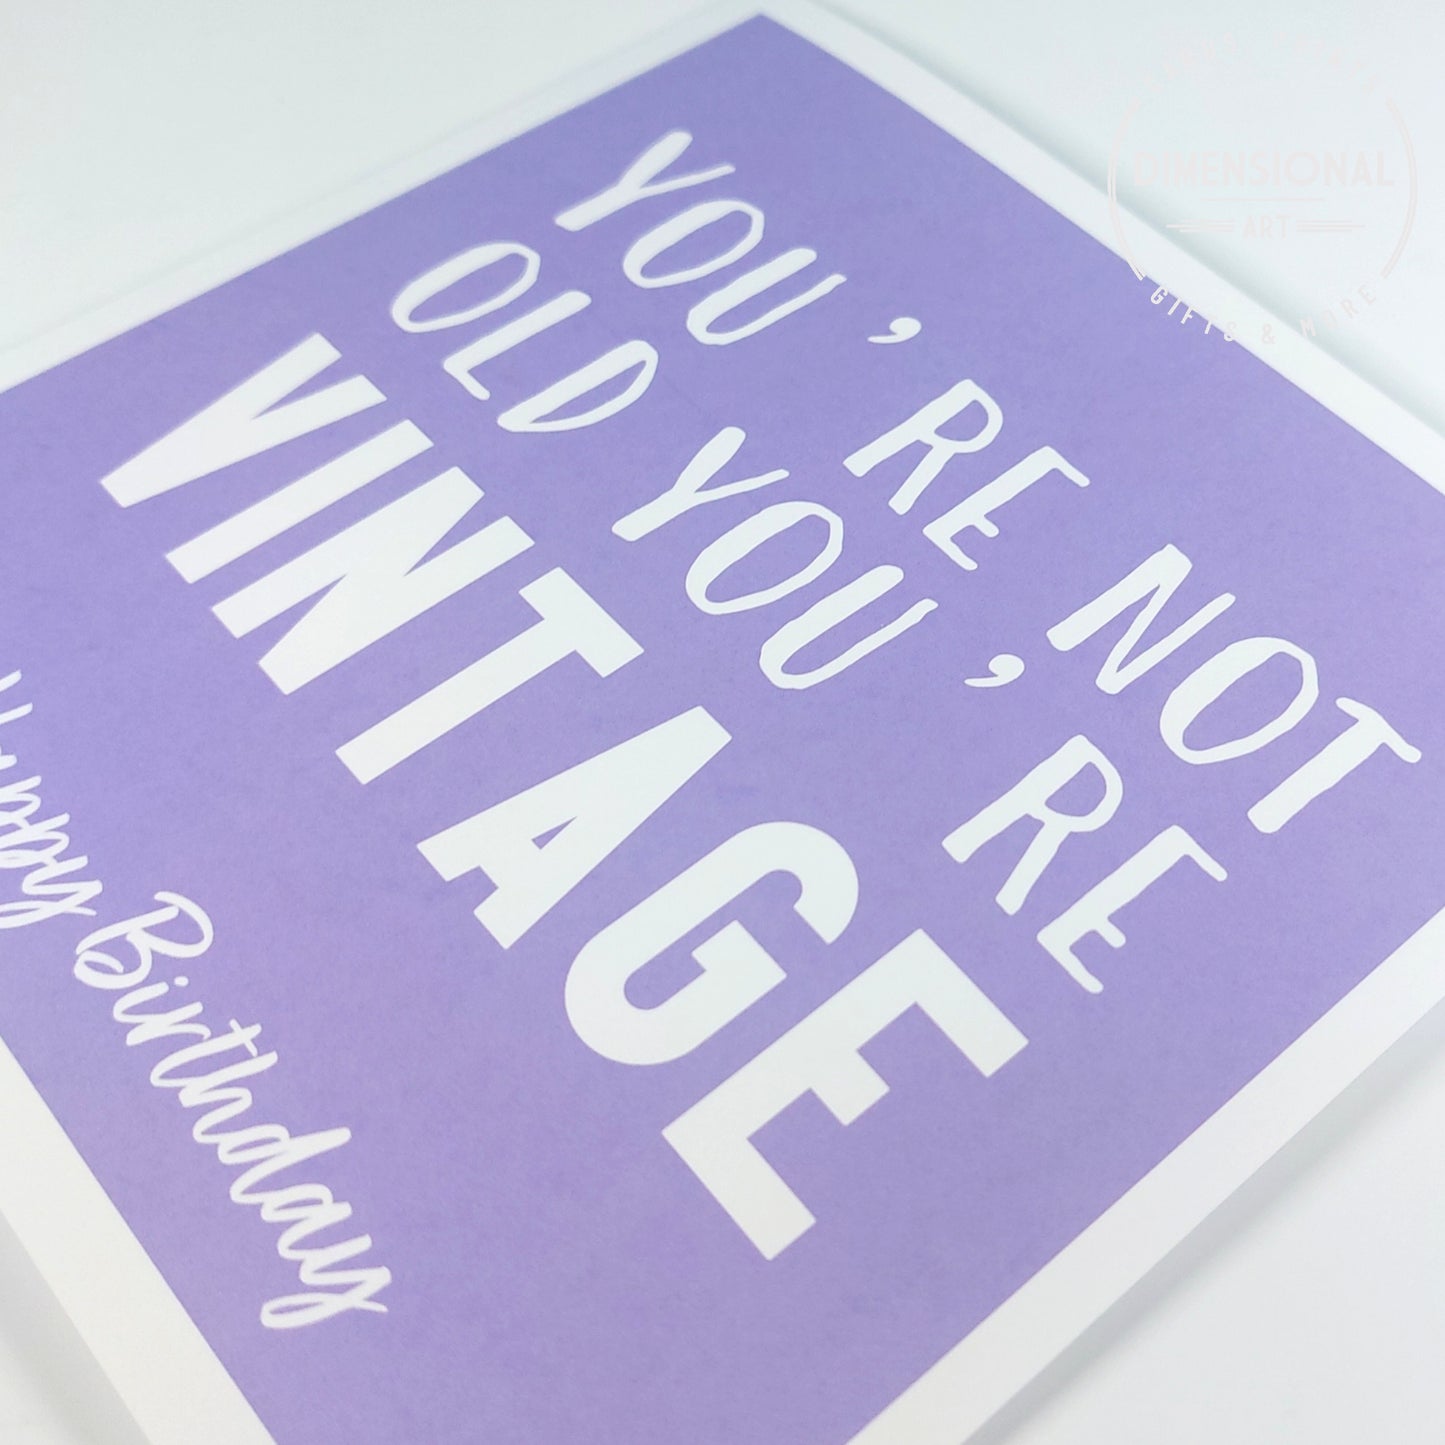 You're not old you're vintage - Birthday Card